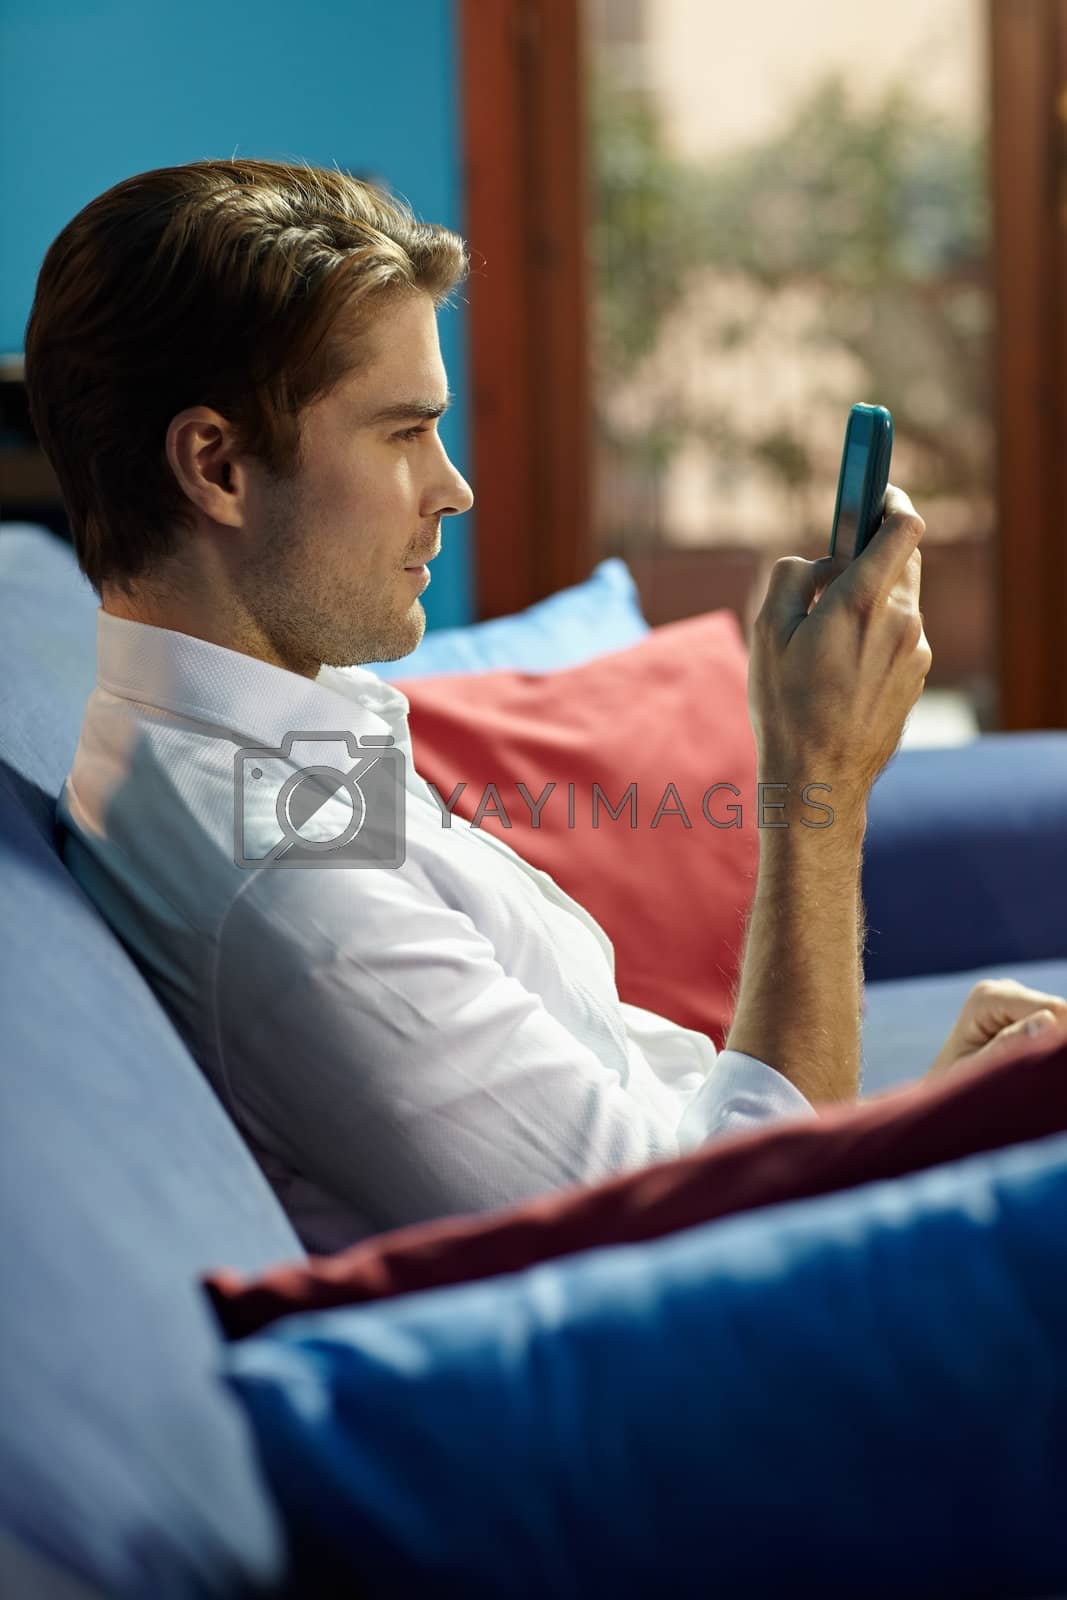 Royalty free image of man typing sms on cellphone by diego_cervo